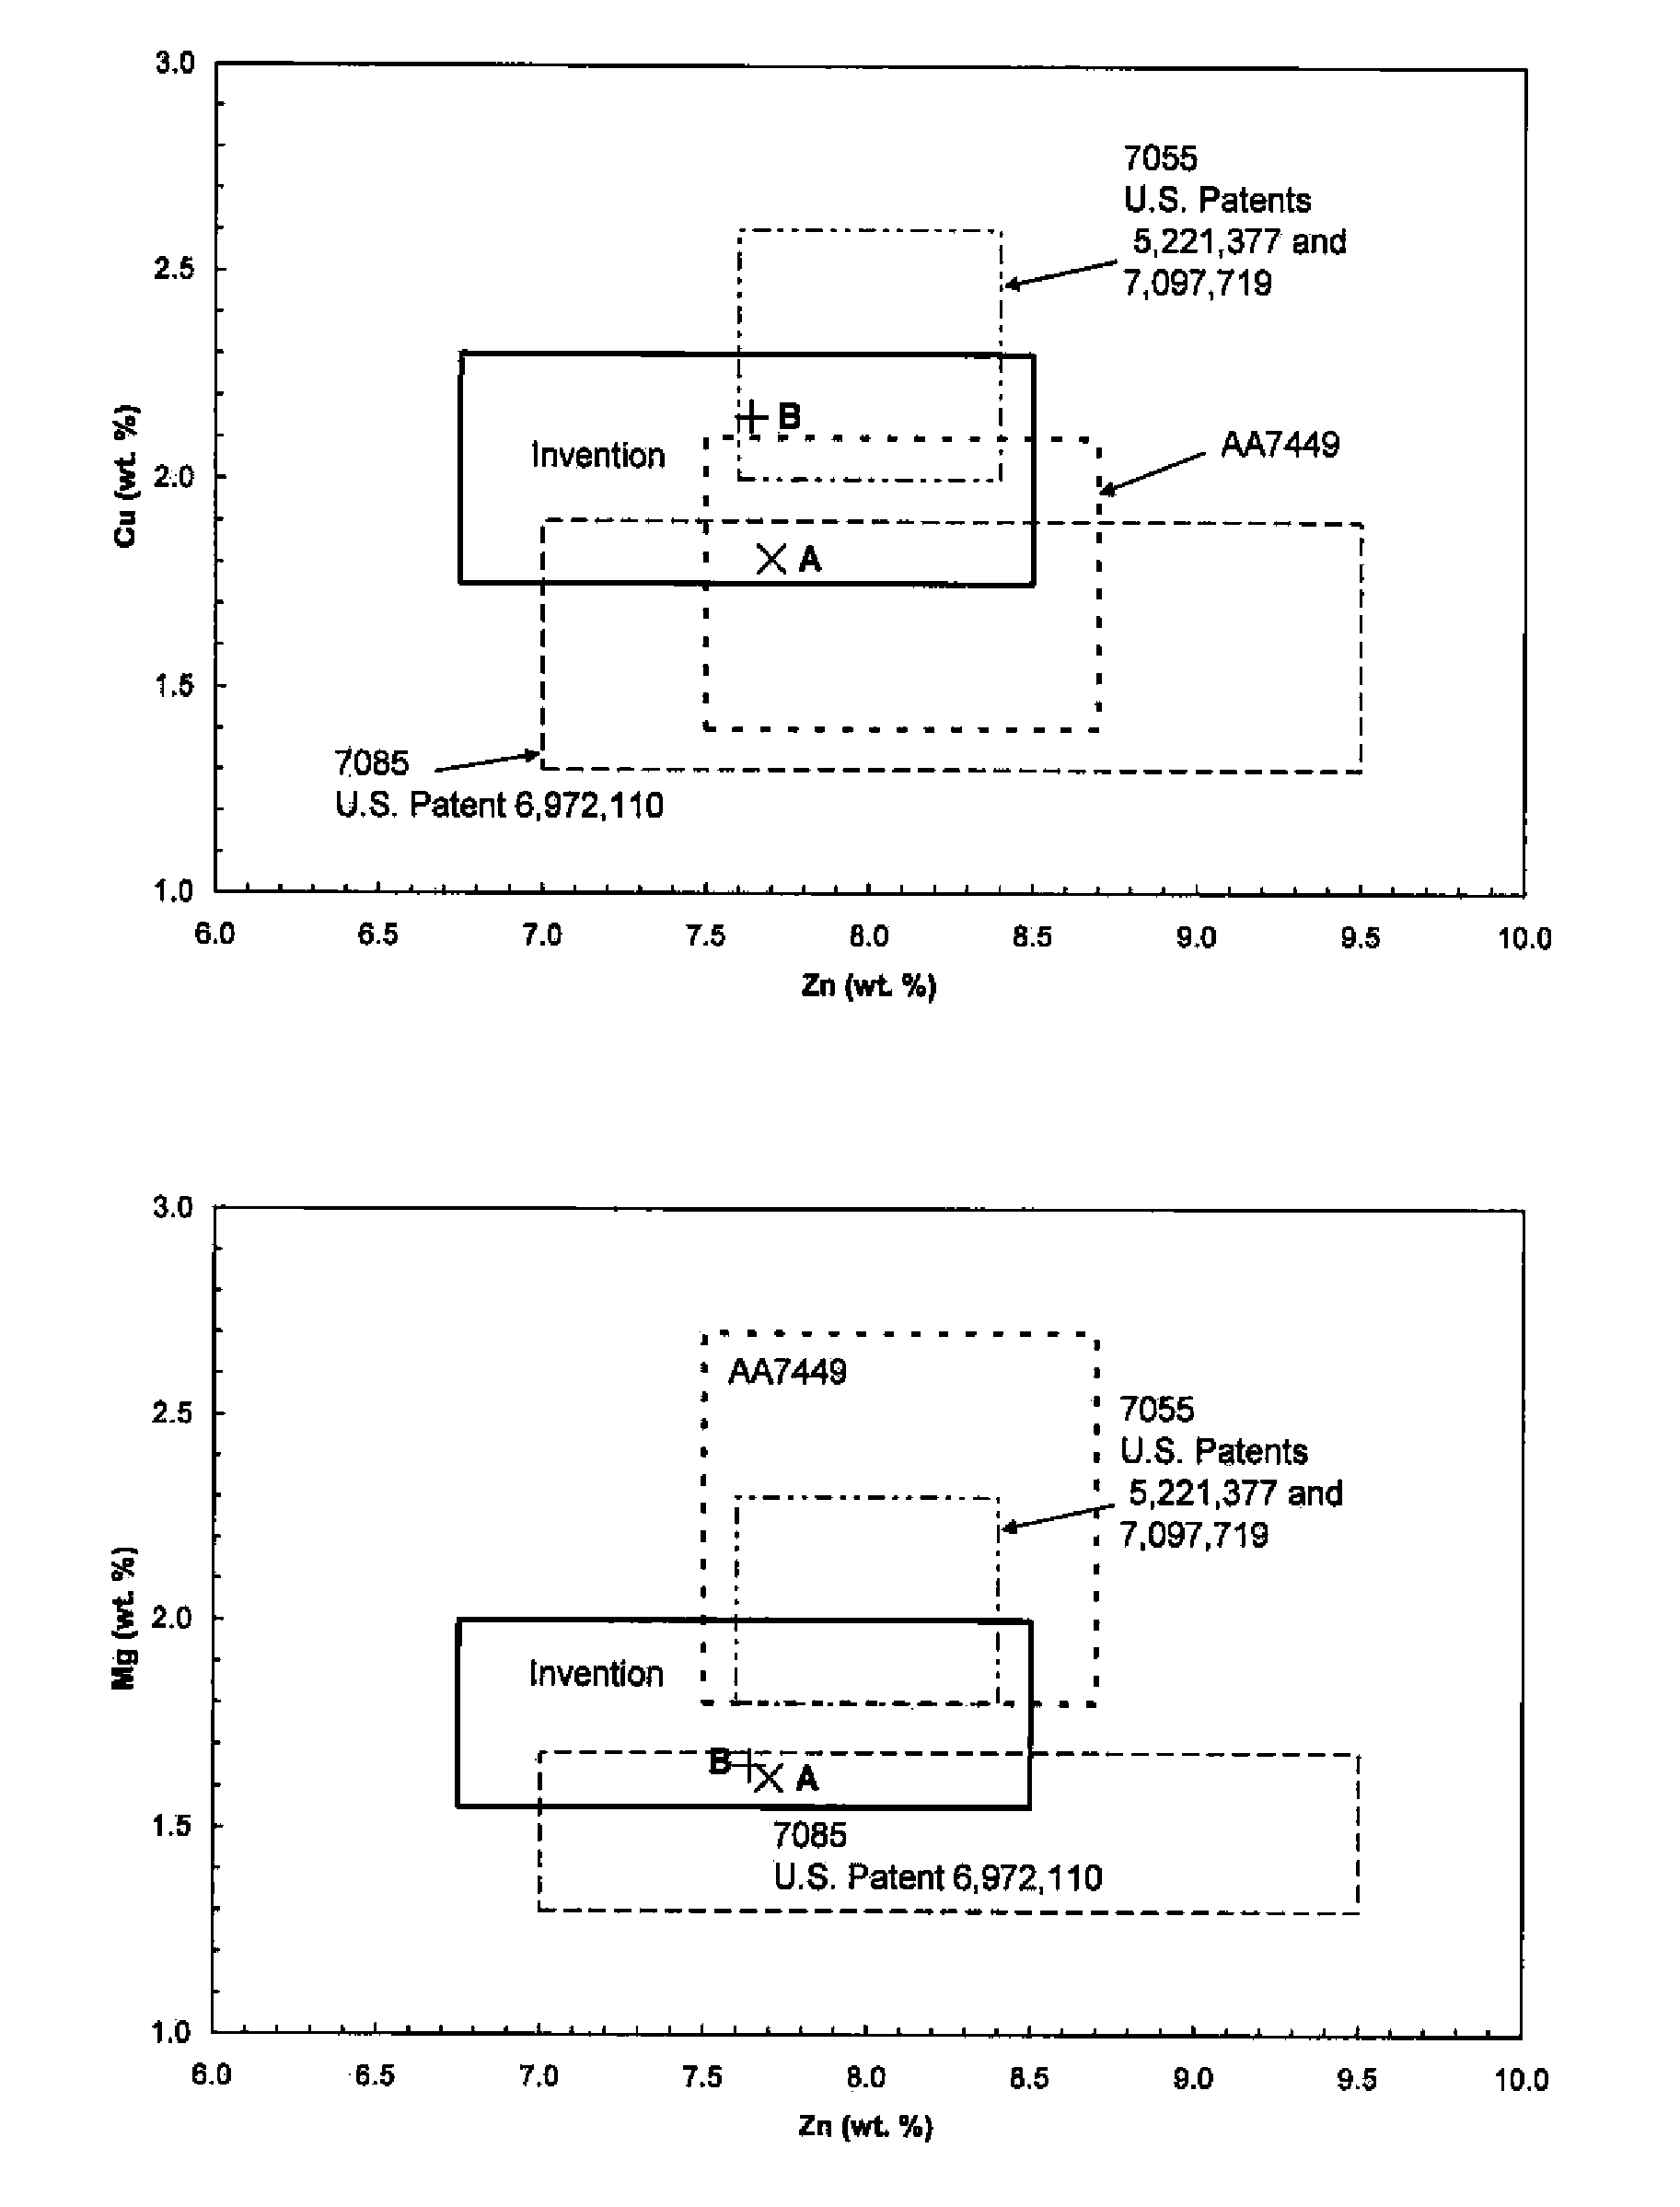 Aluminum Alloy Products Having Improved Property Combinations and Method for Artificially Aging Same